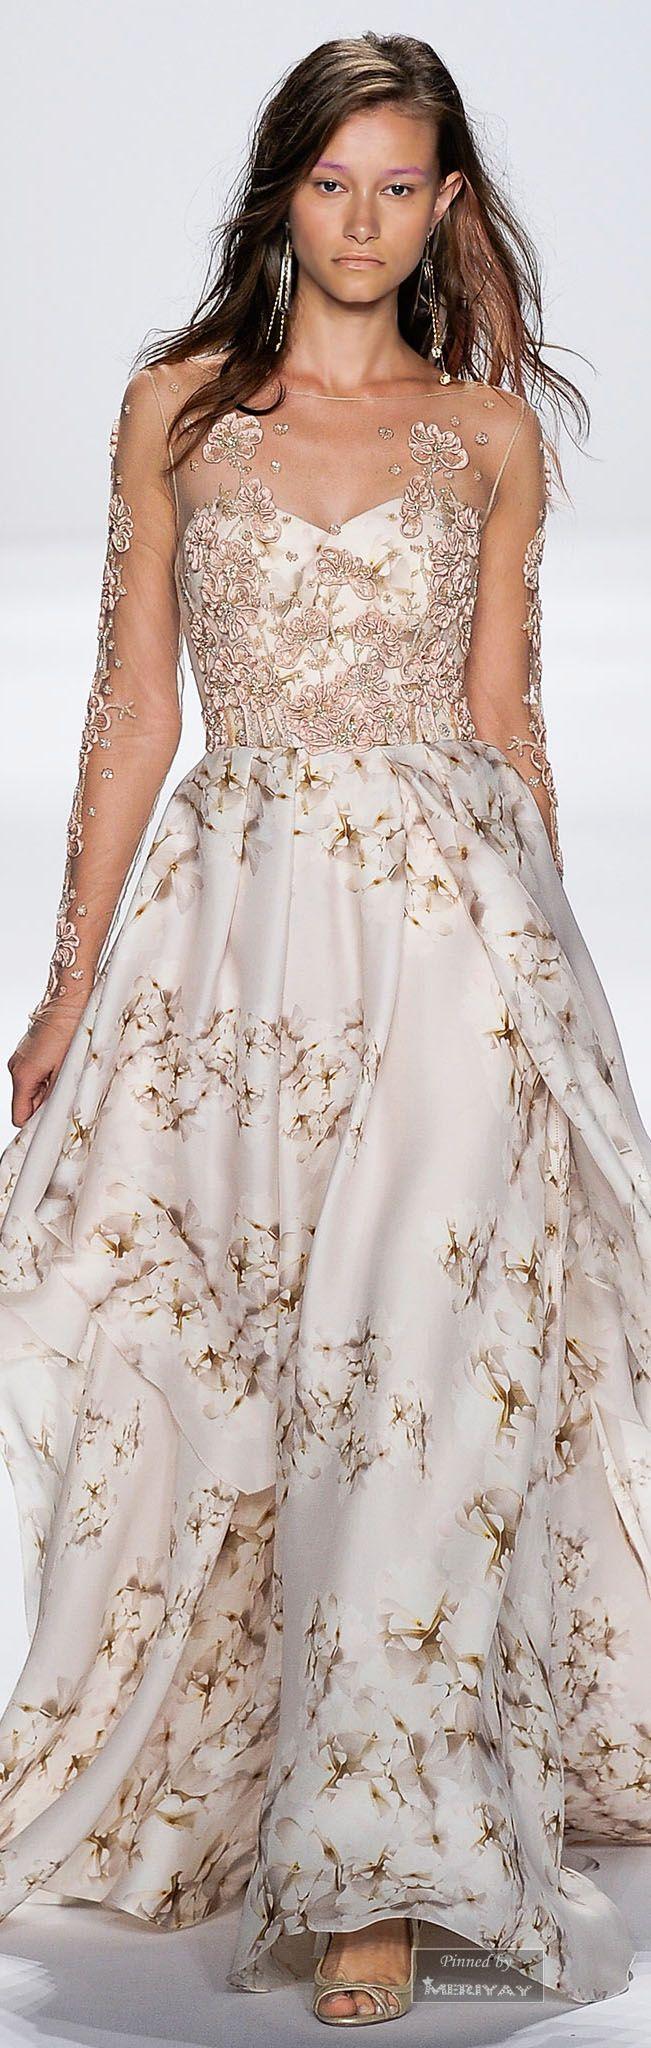 Mariage - Badgley Mischka Spring 2015 Ready-to-Wear - Collection - Gallery